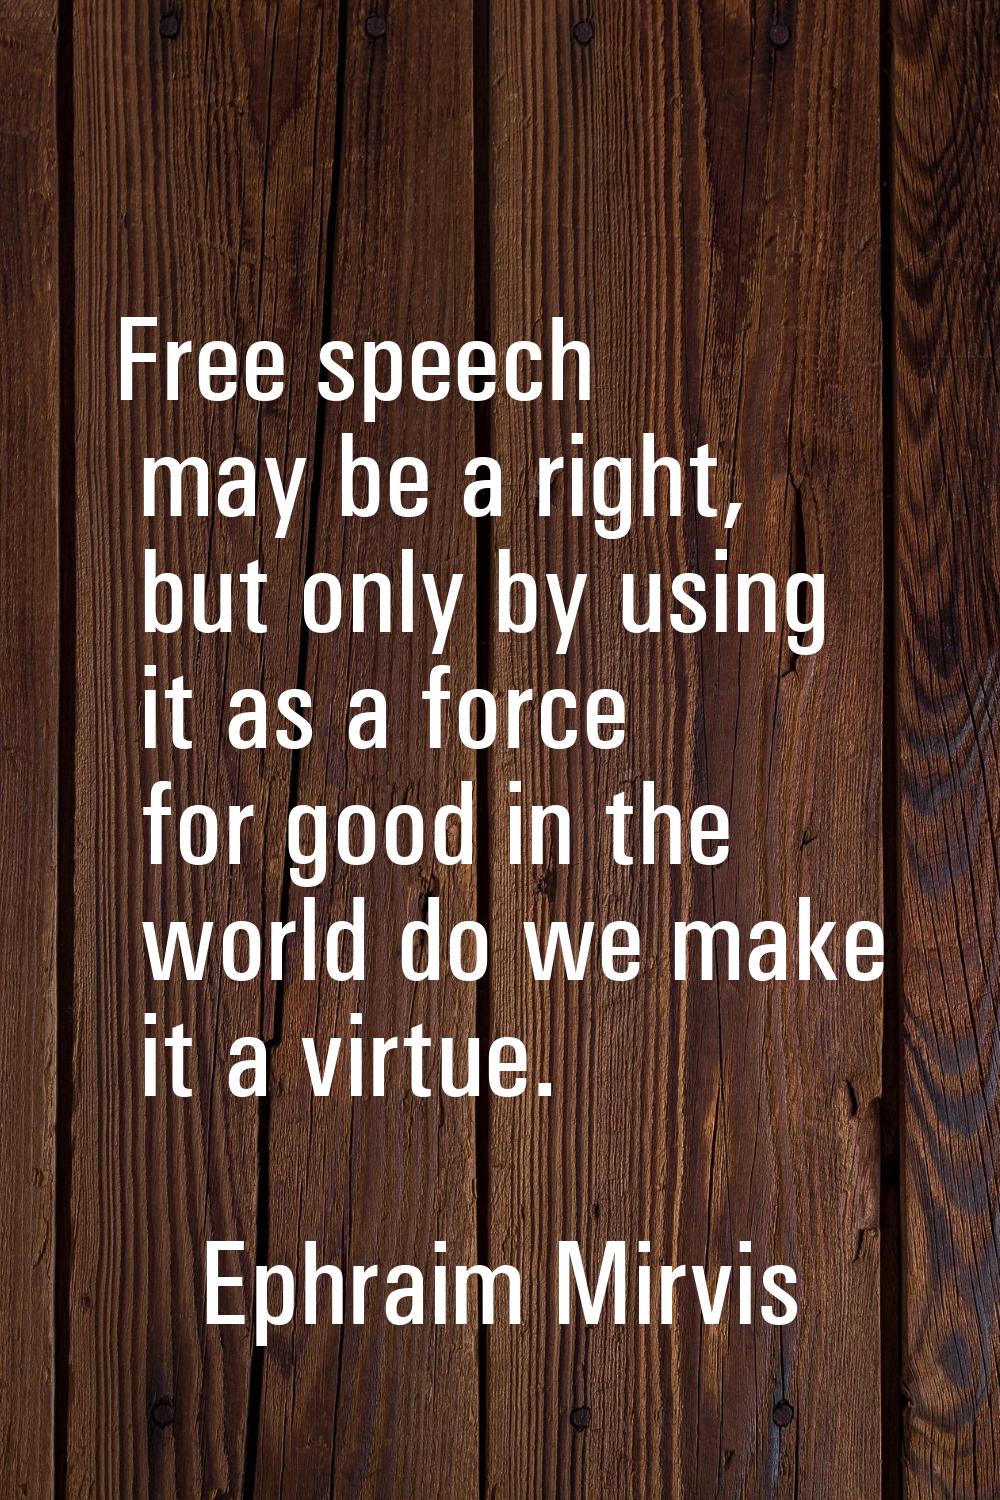 Free speech may be a right, but only by using it as a force for good in the world do we make it a v